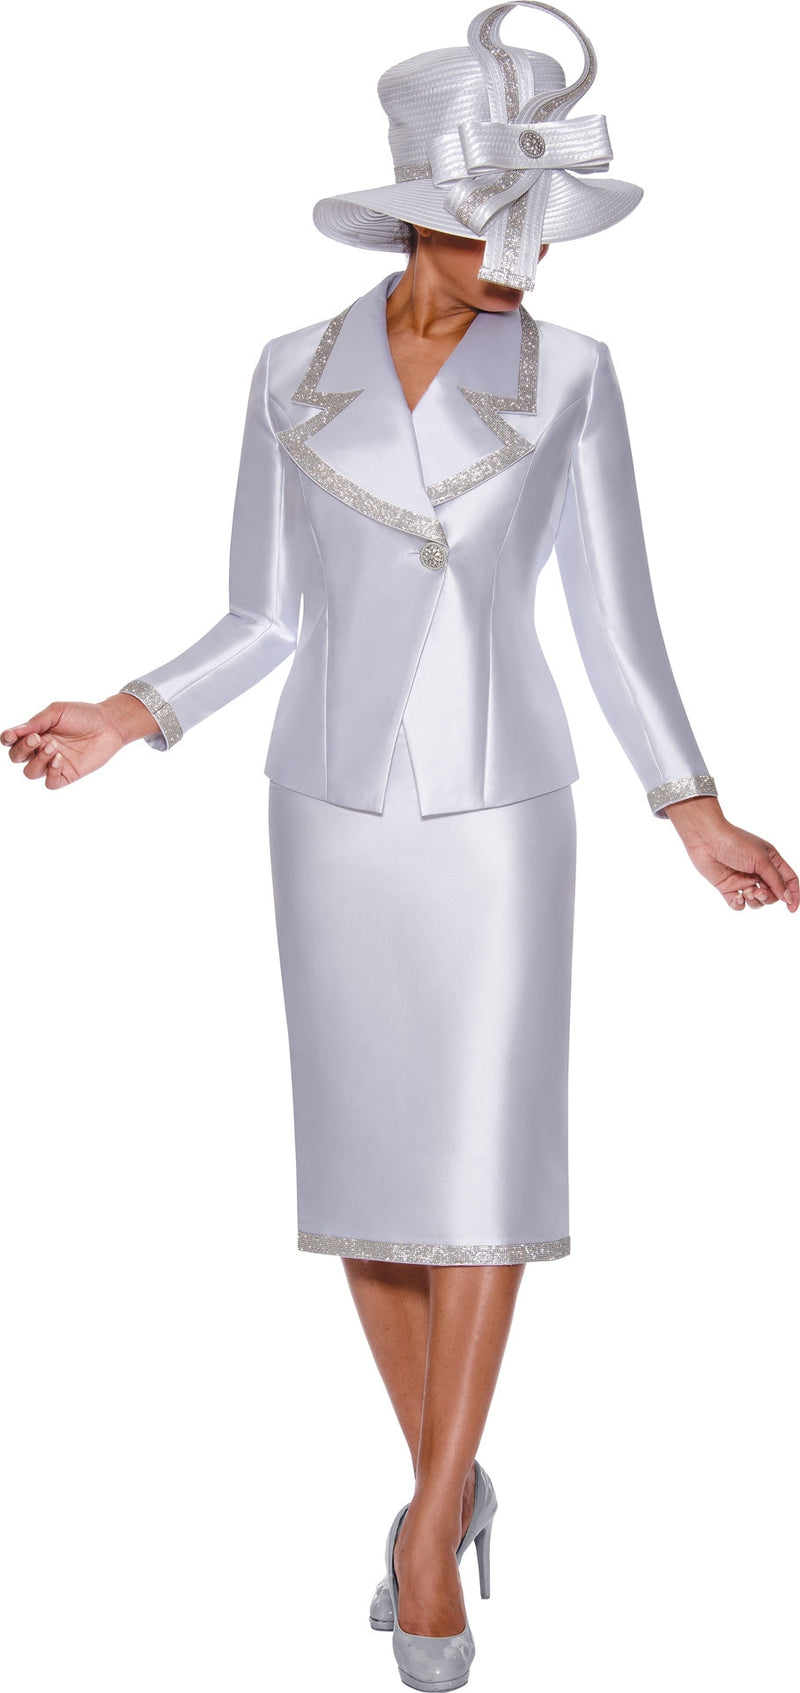 GMI Church Suit 9872-White - Church Suits For Less